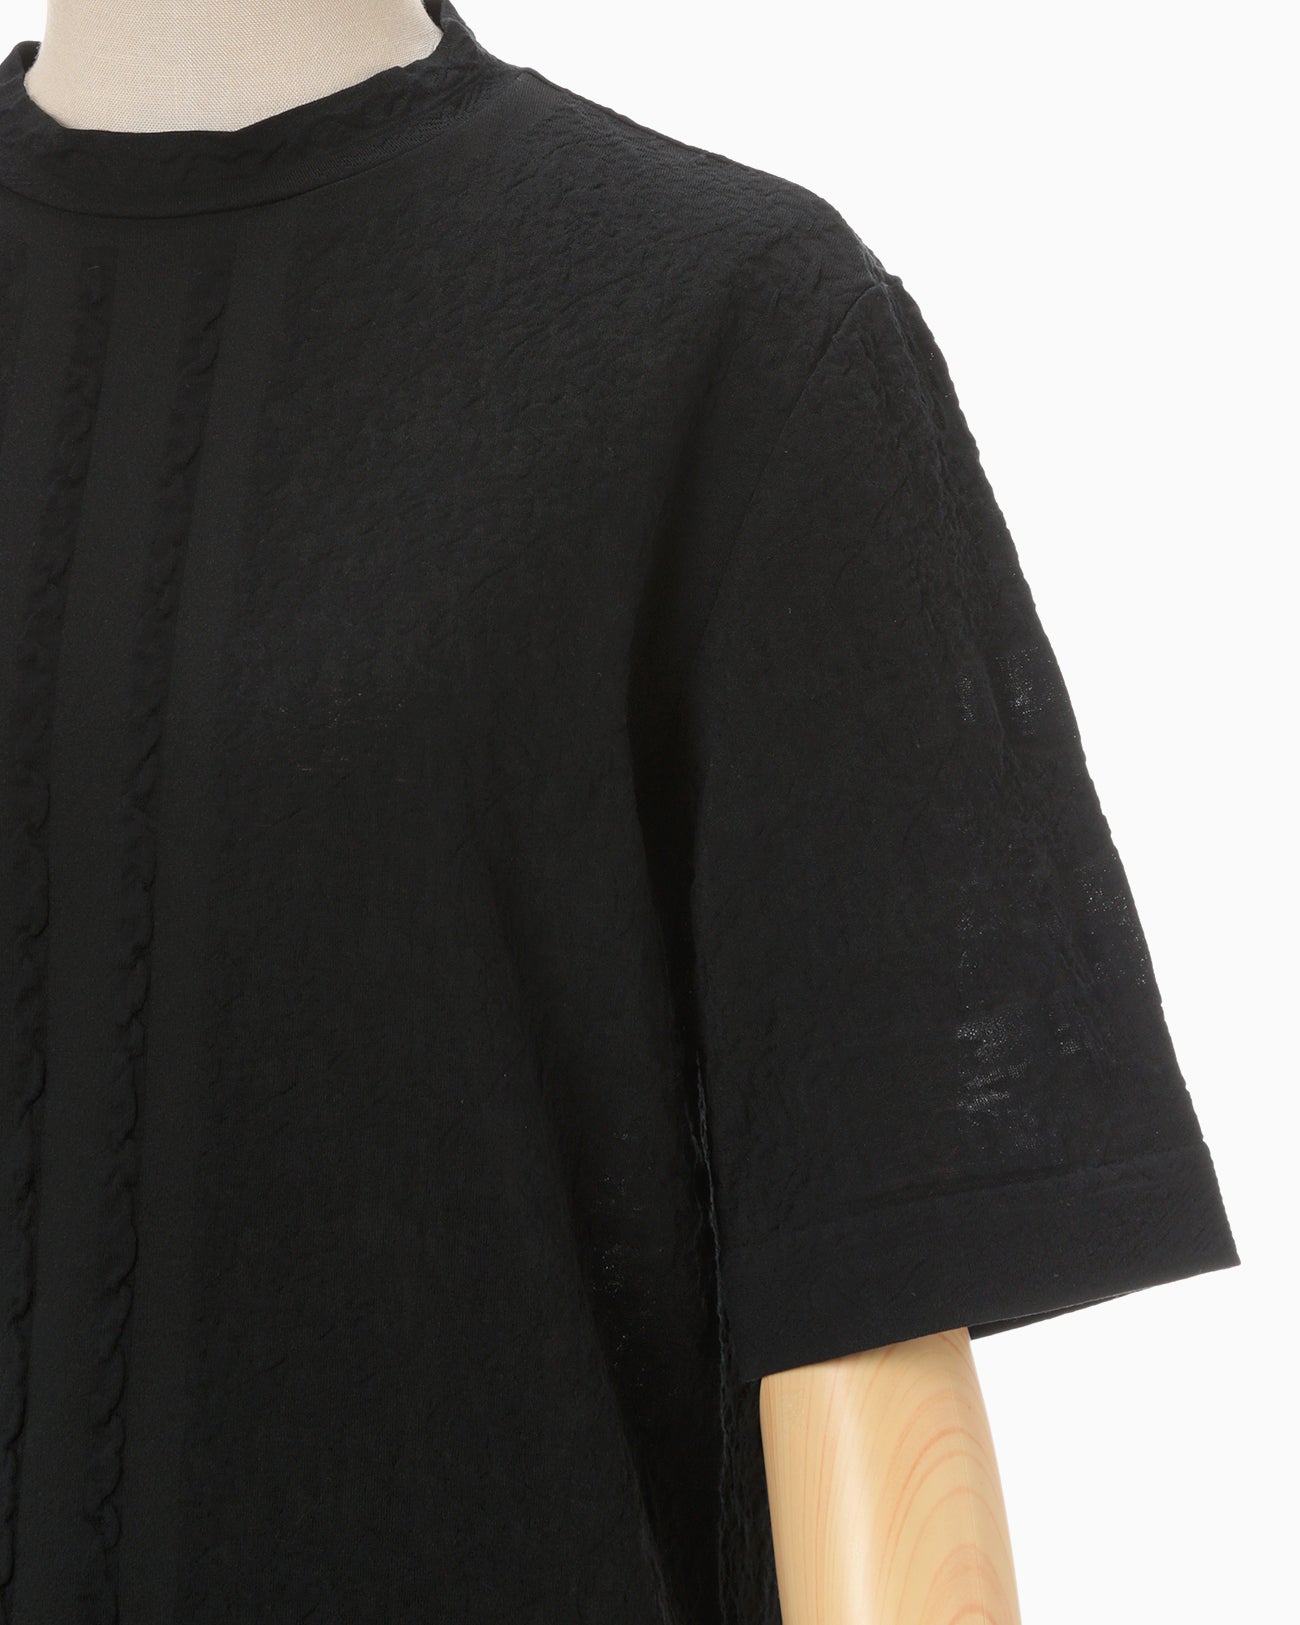 Landscape Graphic Sheer Knitted Crew Neck Top - black